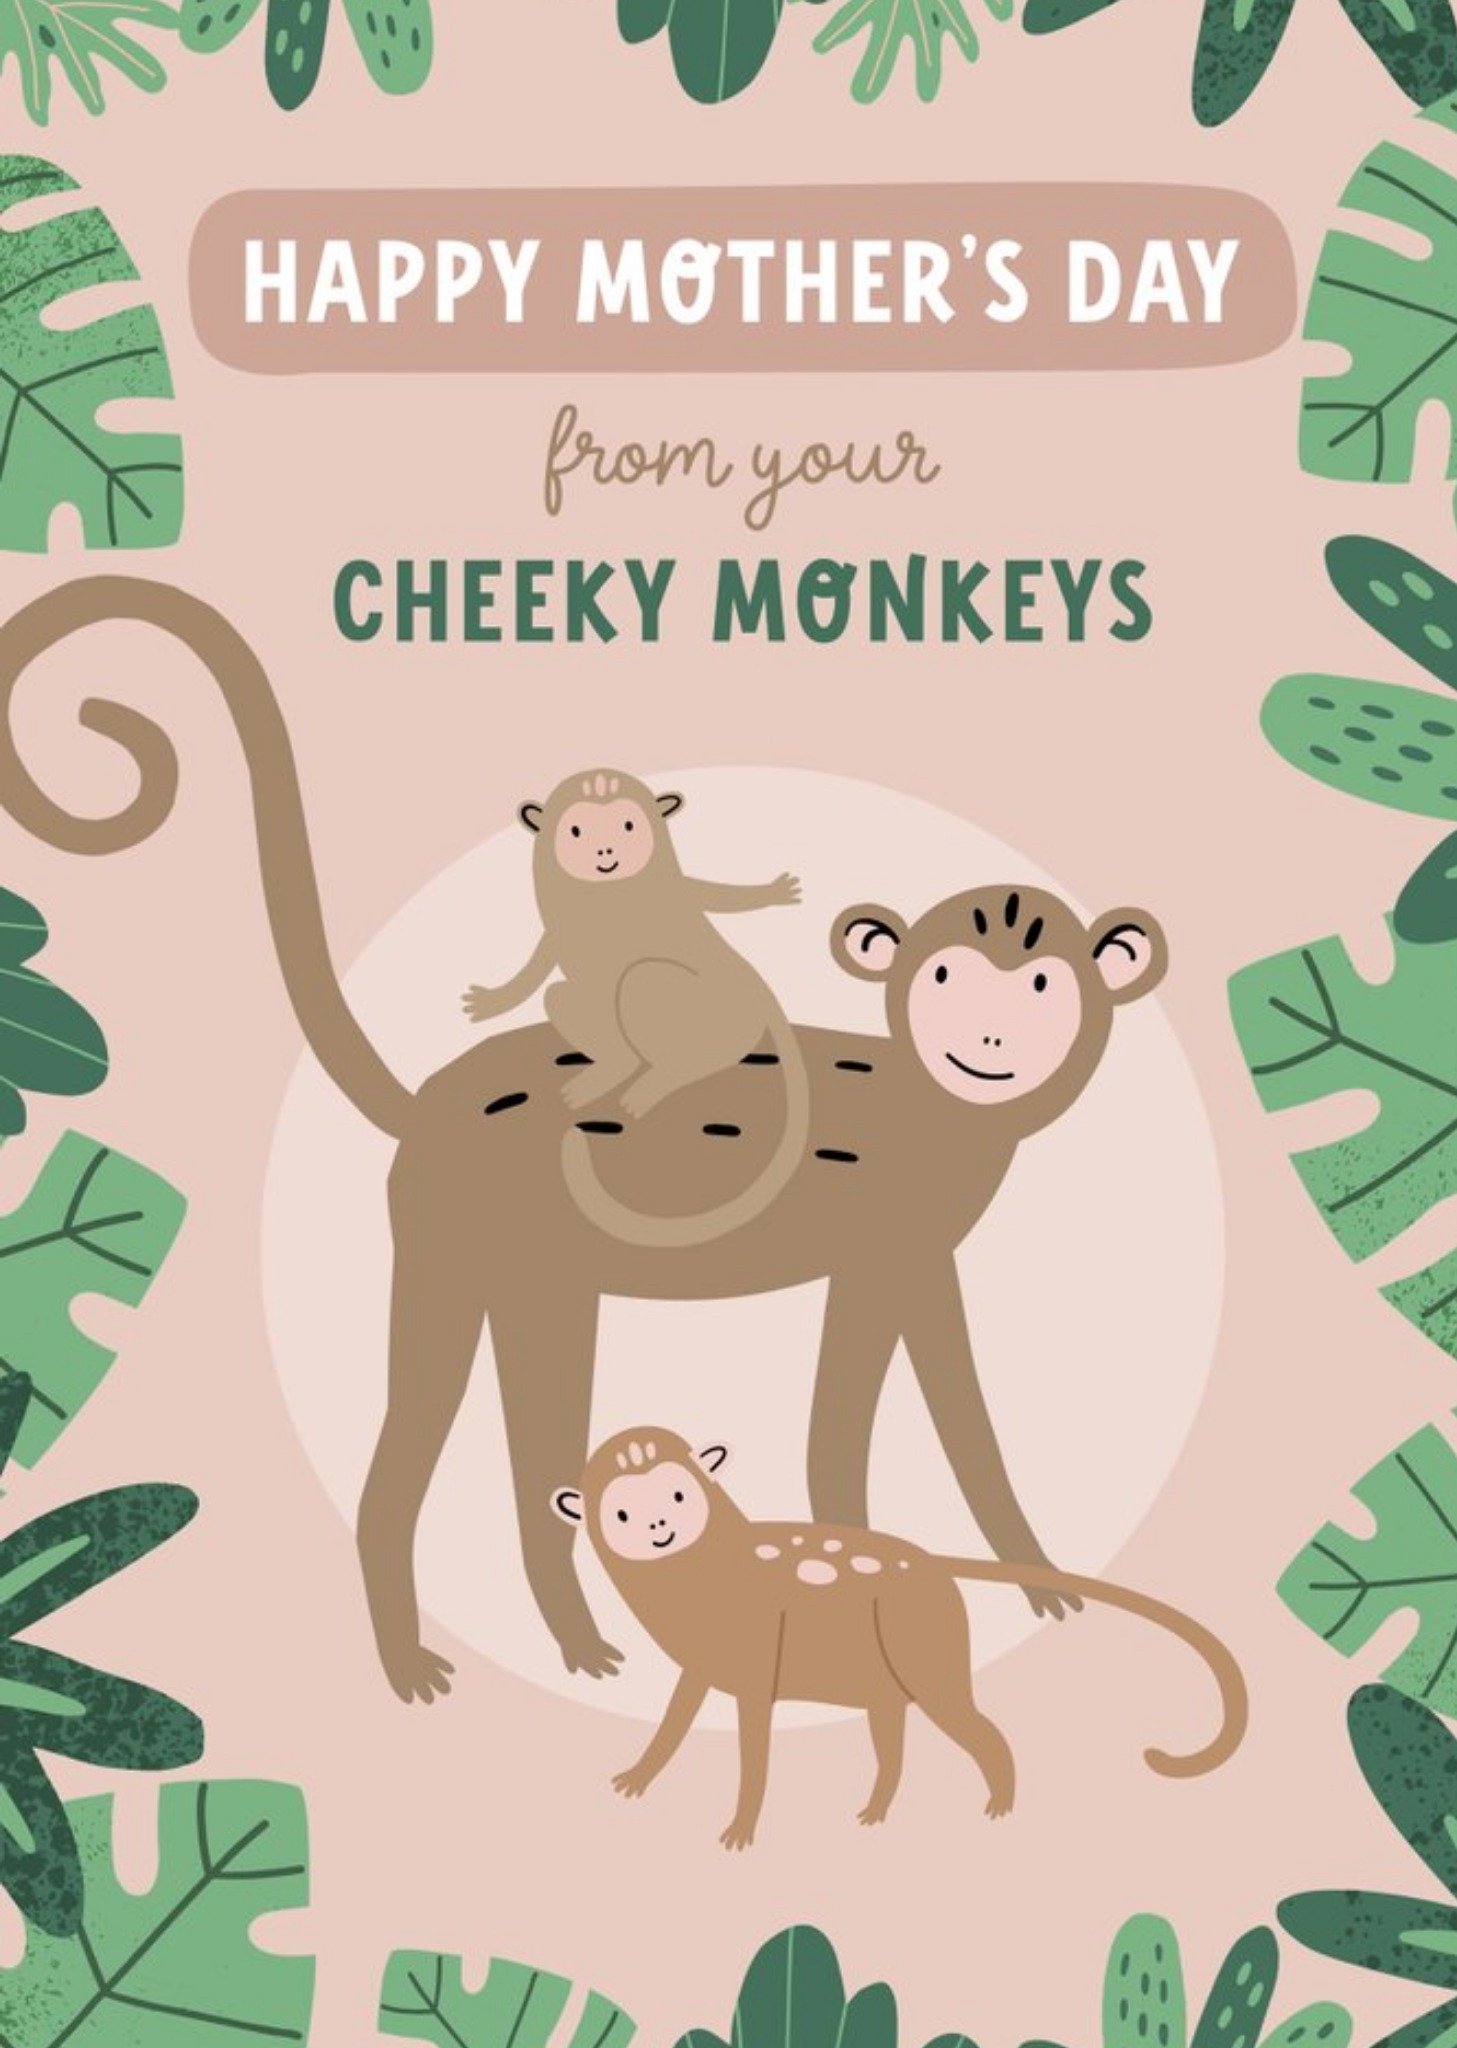 Moonpig Illustration Of Cute Cheeky Monkeys Surrounded By Jungle Foliage Mother's Day Card Ecard